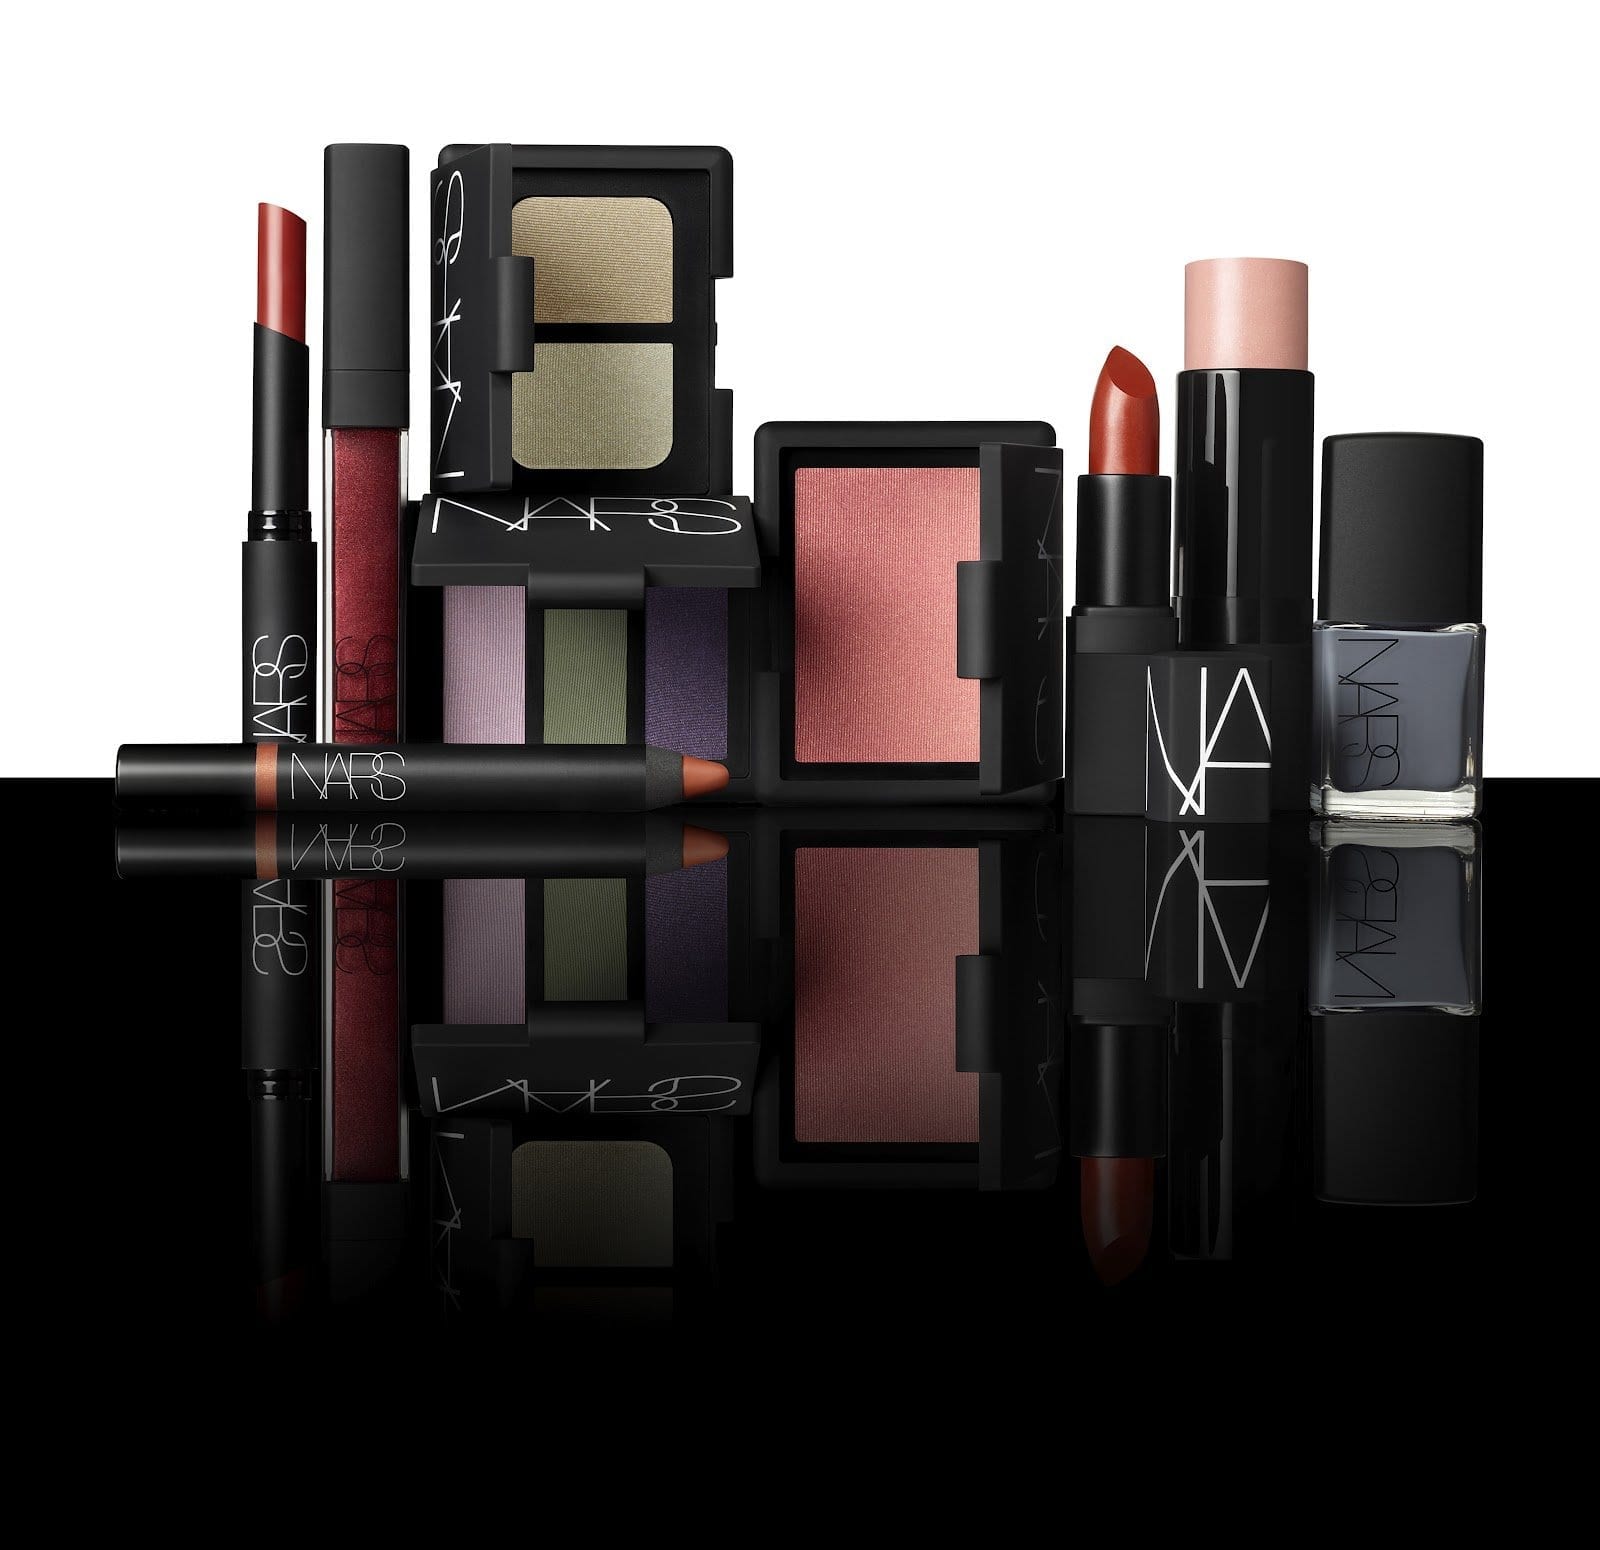 NARS-Fall-Group-Product-Shot-cropped-hi-res Top Cosmetic Brands - 15 Most Popular Beauty Brands List